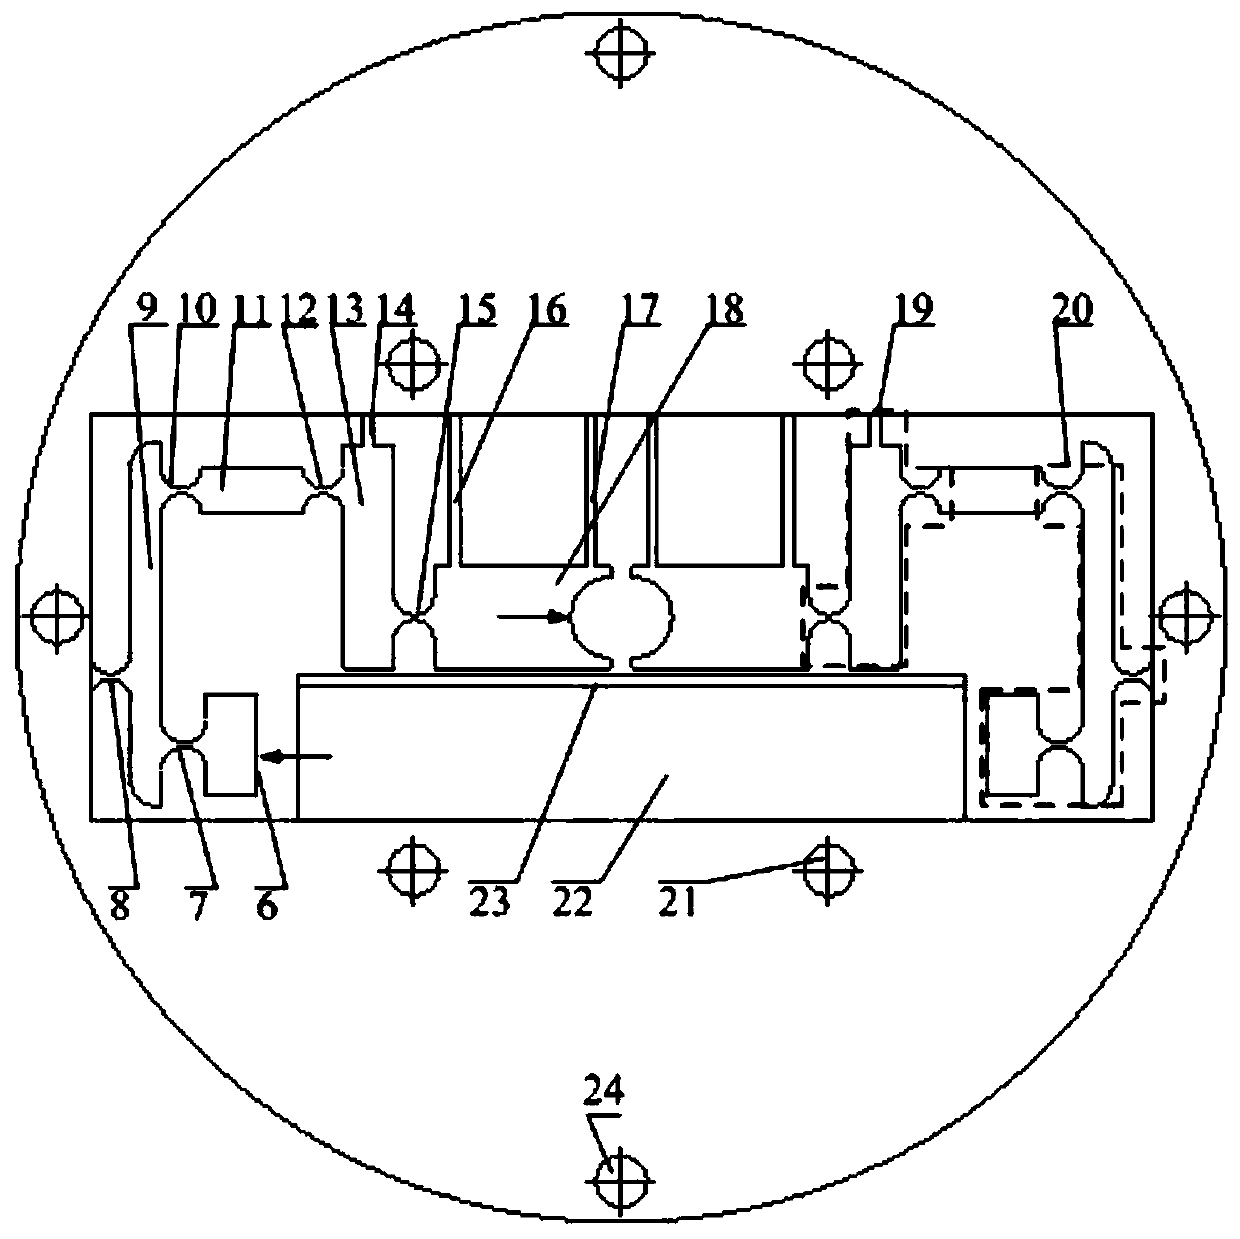 Inchworm precision rotary micro-driver based on compliant mechanism